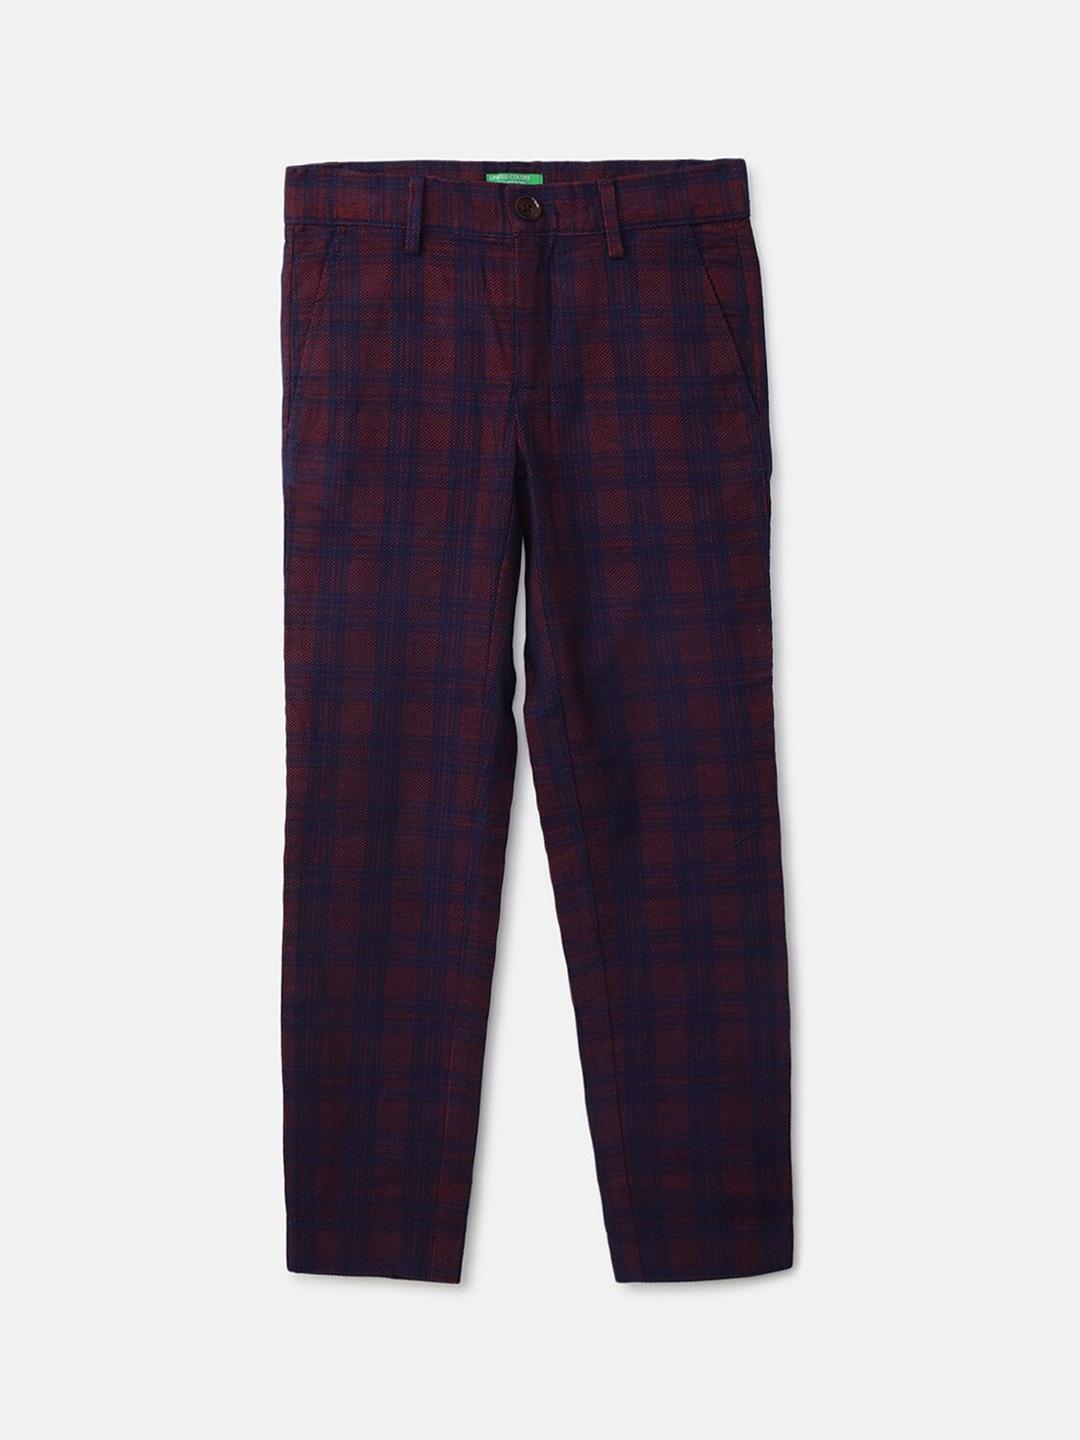 United Colors of Benetton Boys Multicoloured Checked Trousers